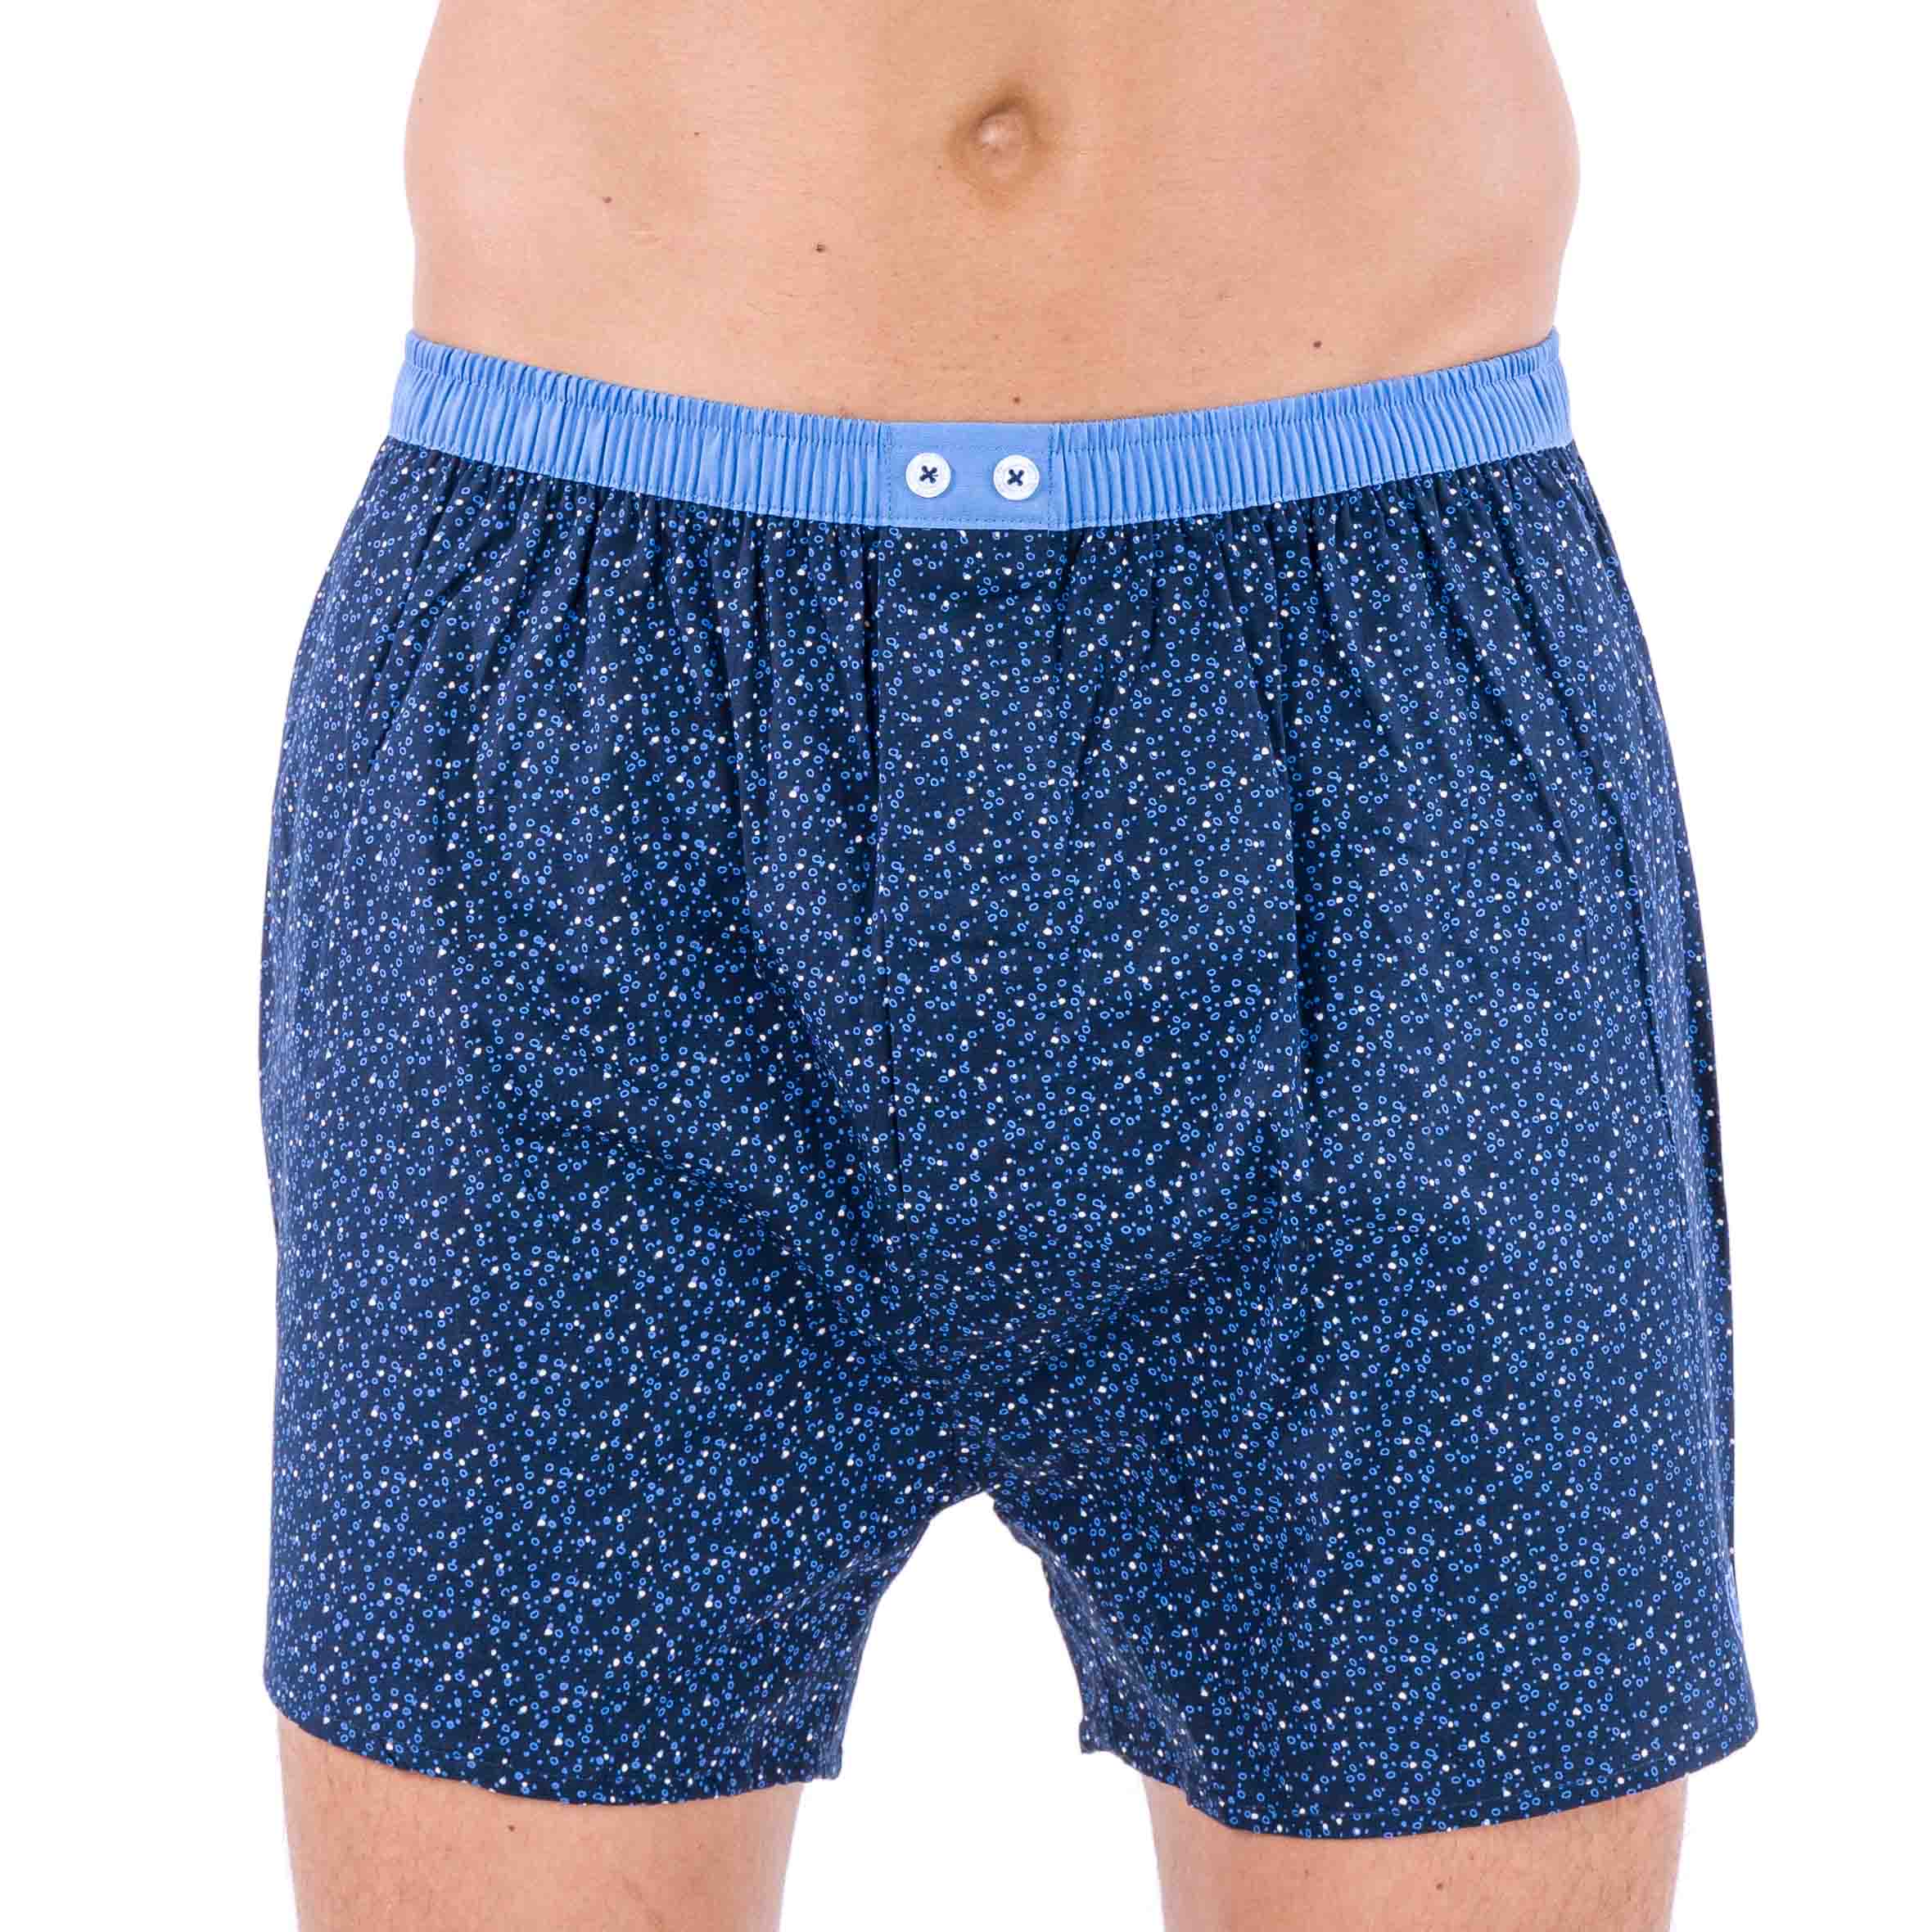 Pack of 2 Poplin Boxer Briefs in Pure Cotton Navy Blue + Vichy Blue